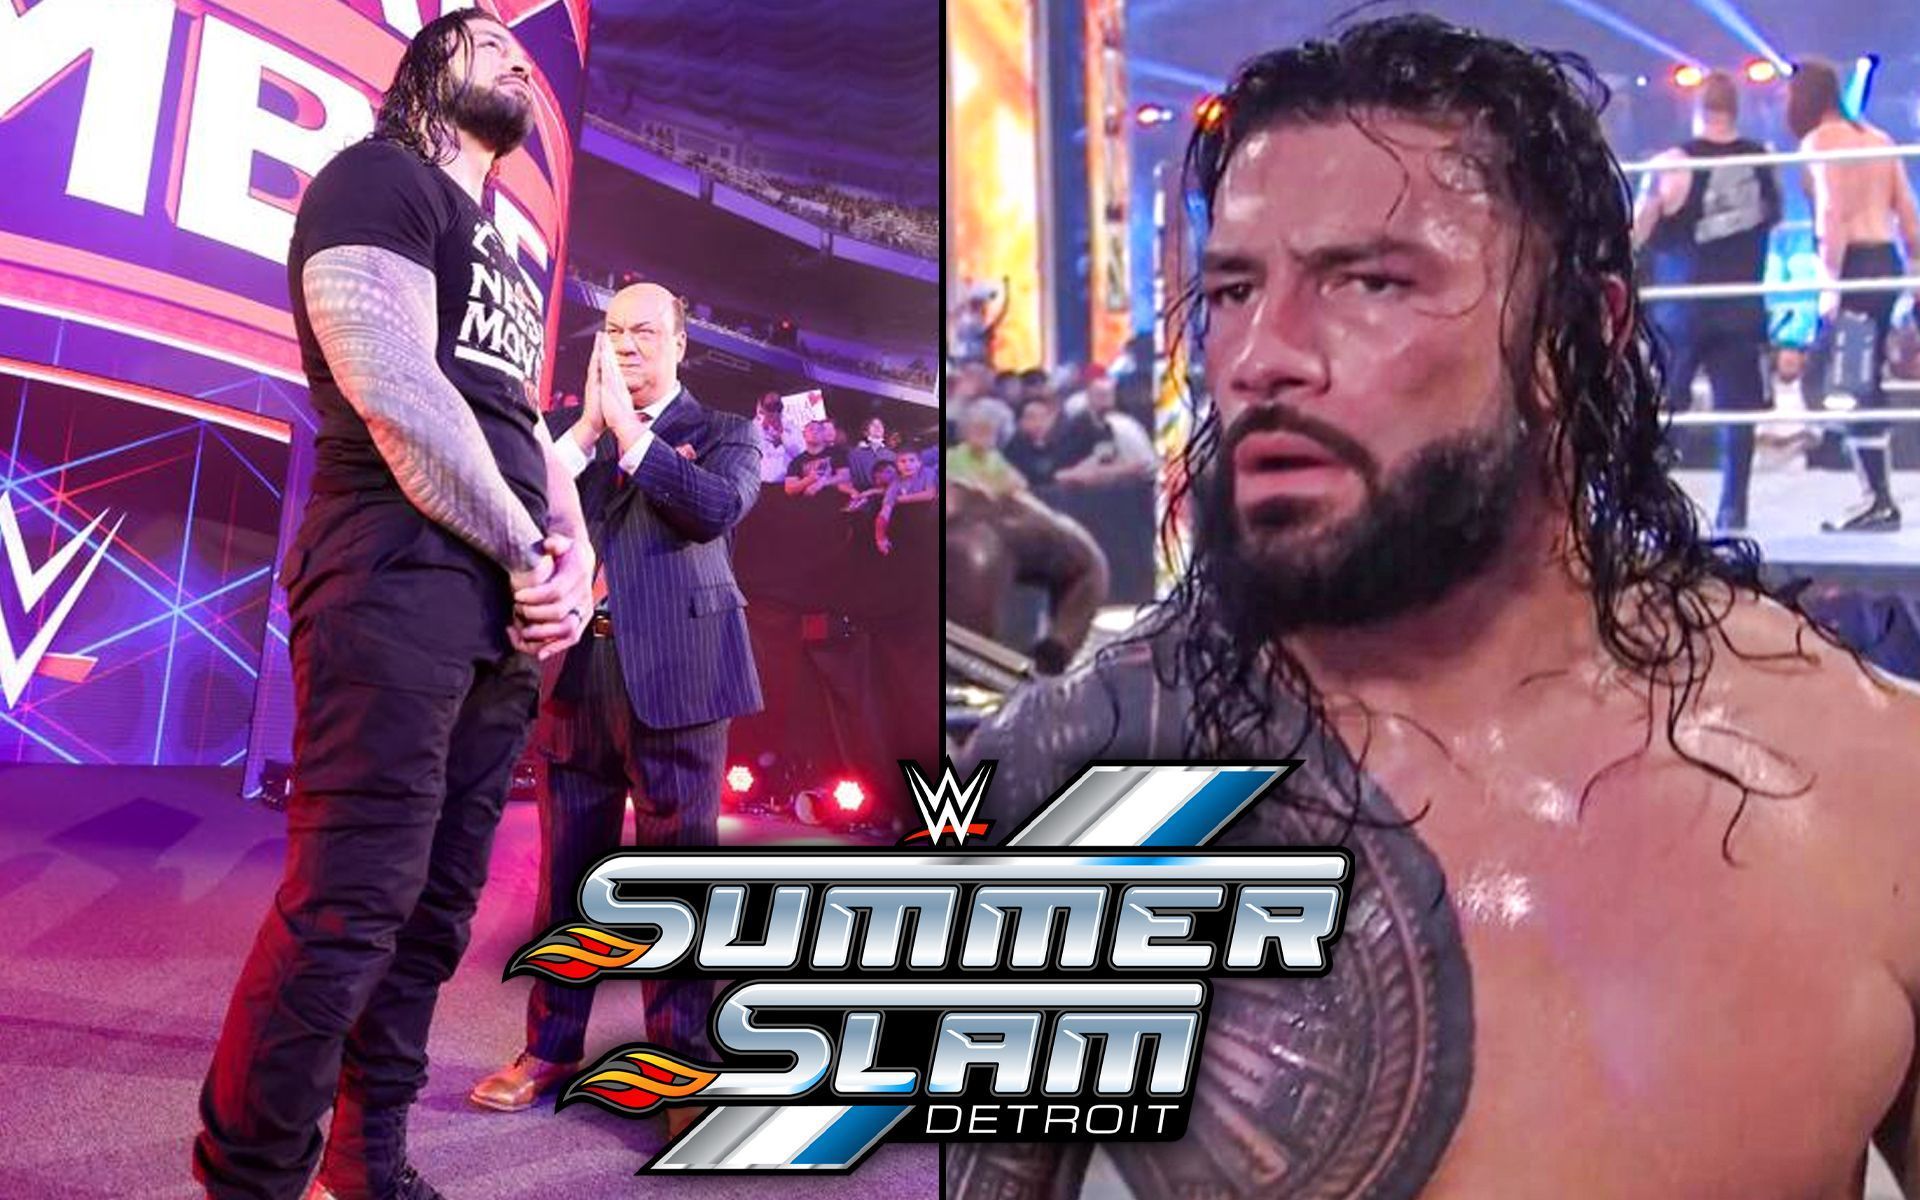 Roman Reigns is set to be the part of WWE SummerSlam 2023